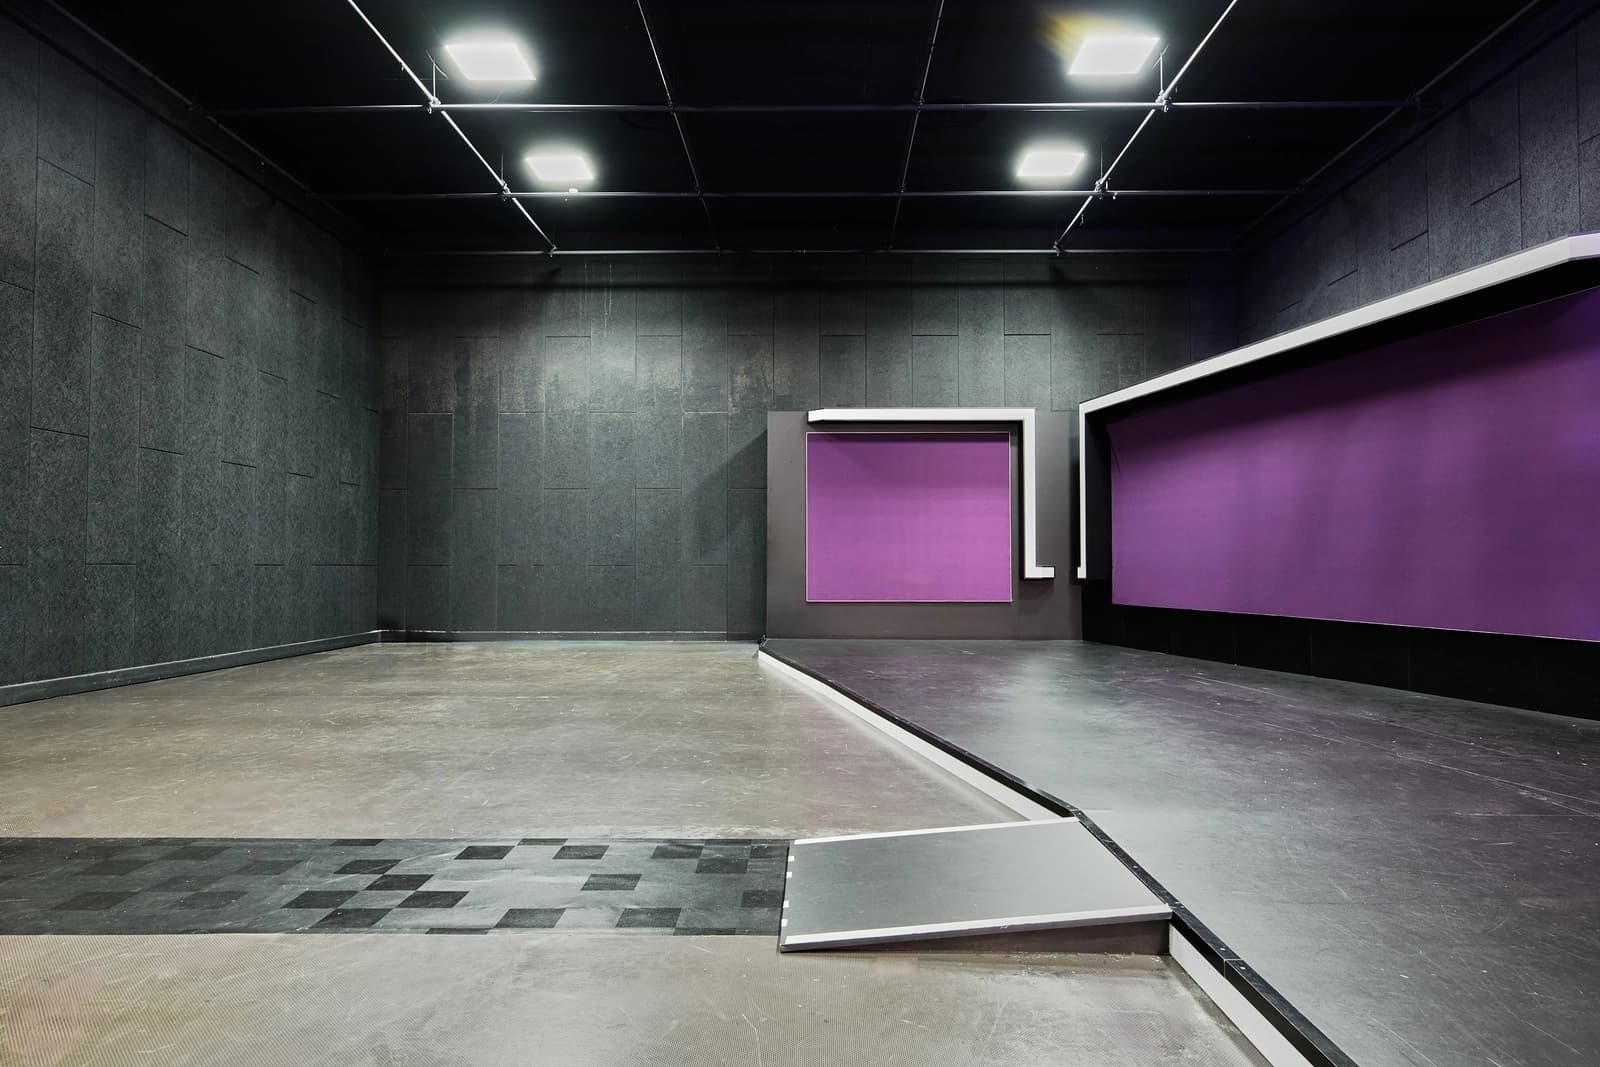 Space TV studio with meeting rooms - 3